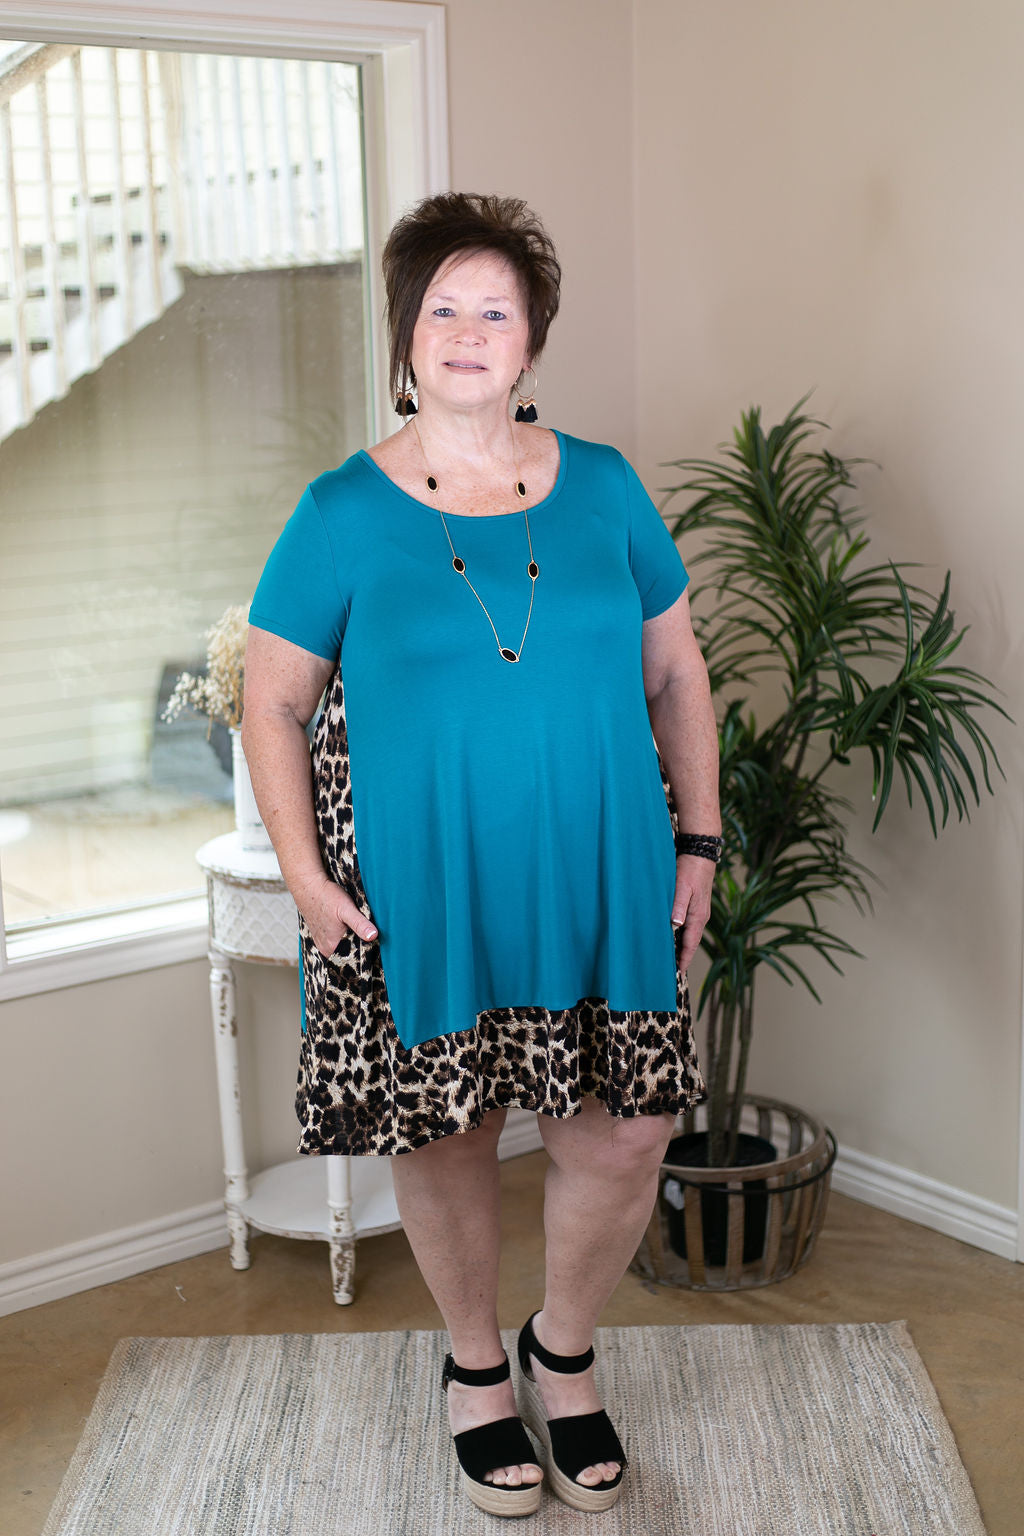 It's My Way Solid Dress with Leopard Print Trim in Turquoise - Giddy Up Glamour Boutique